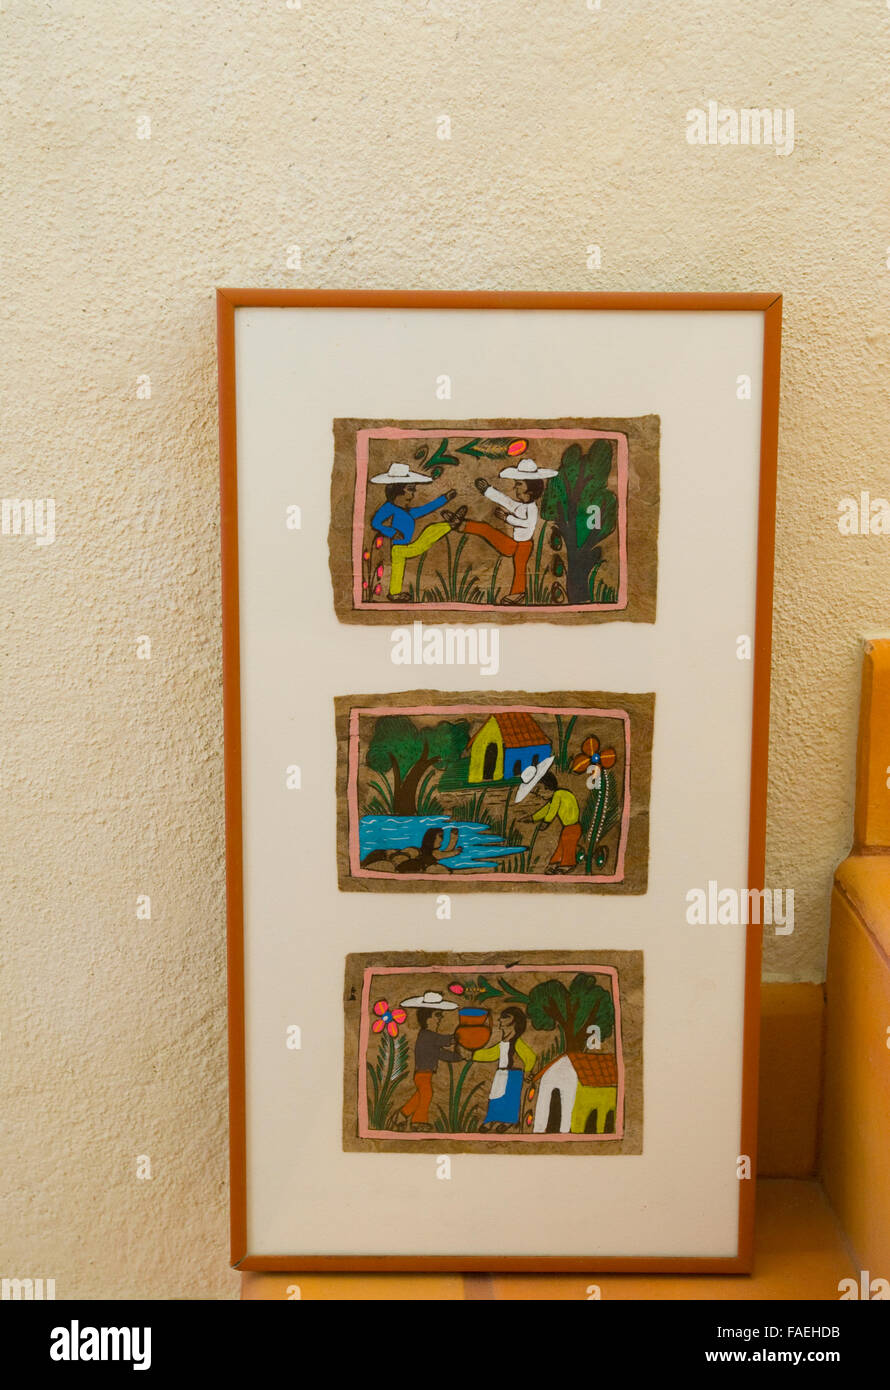 Paintings on handmade amate paper, Mexico: Stock Photo